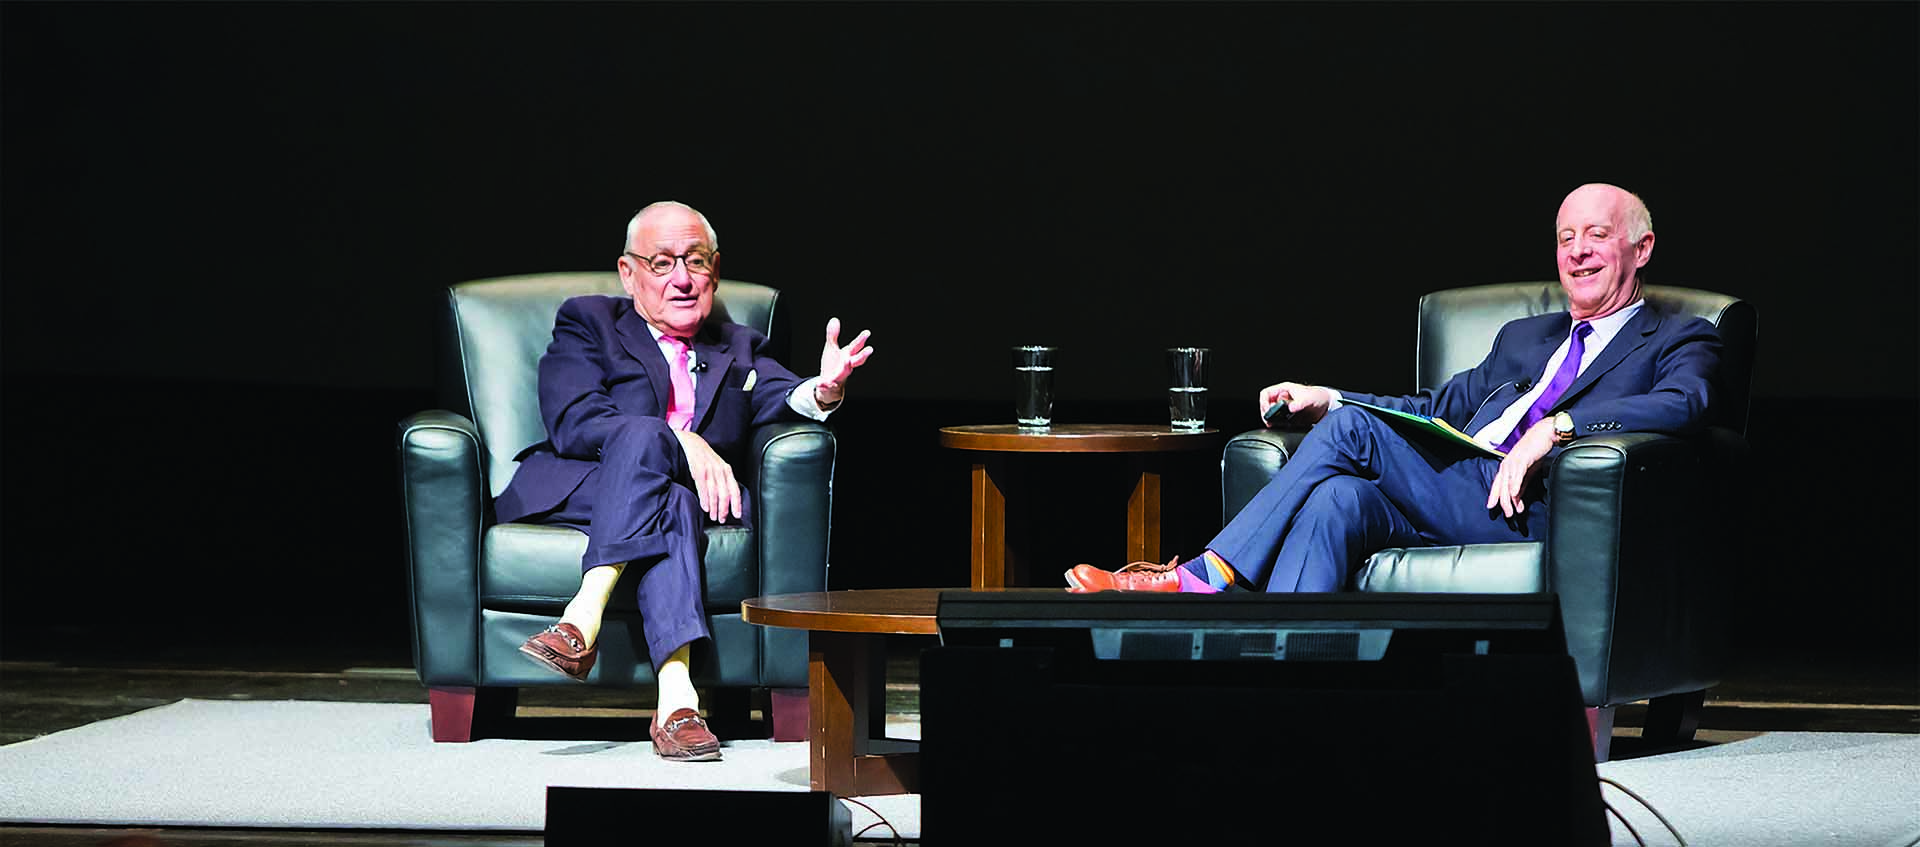 Stern and Goldberger have a discussion on stage